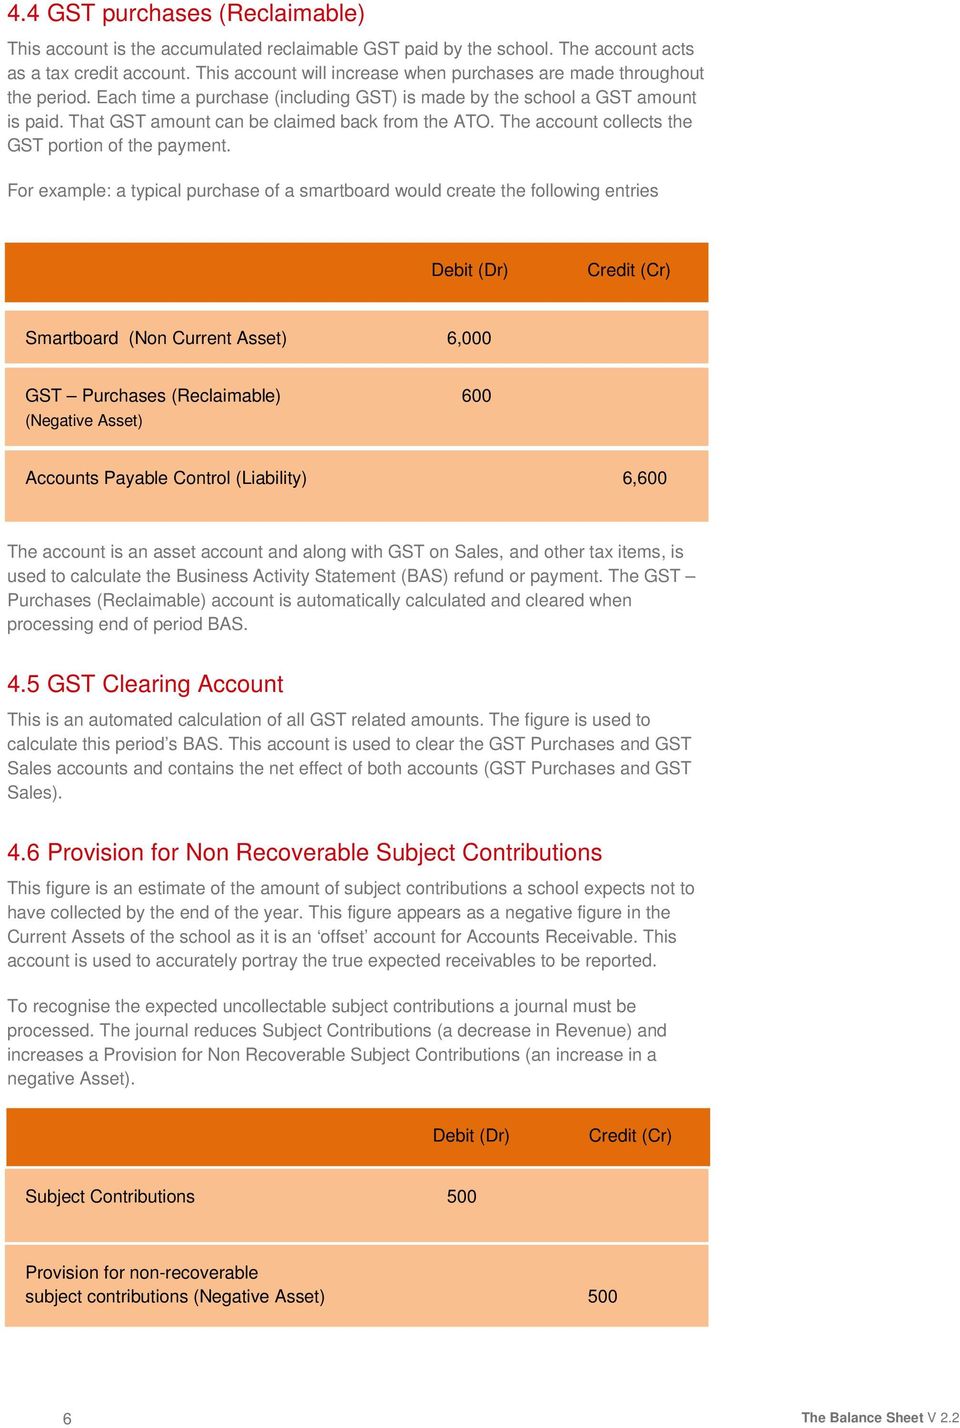 That GST amount can be claimed back from the ATO. The account collects the GST portion of the payment.